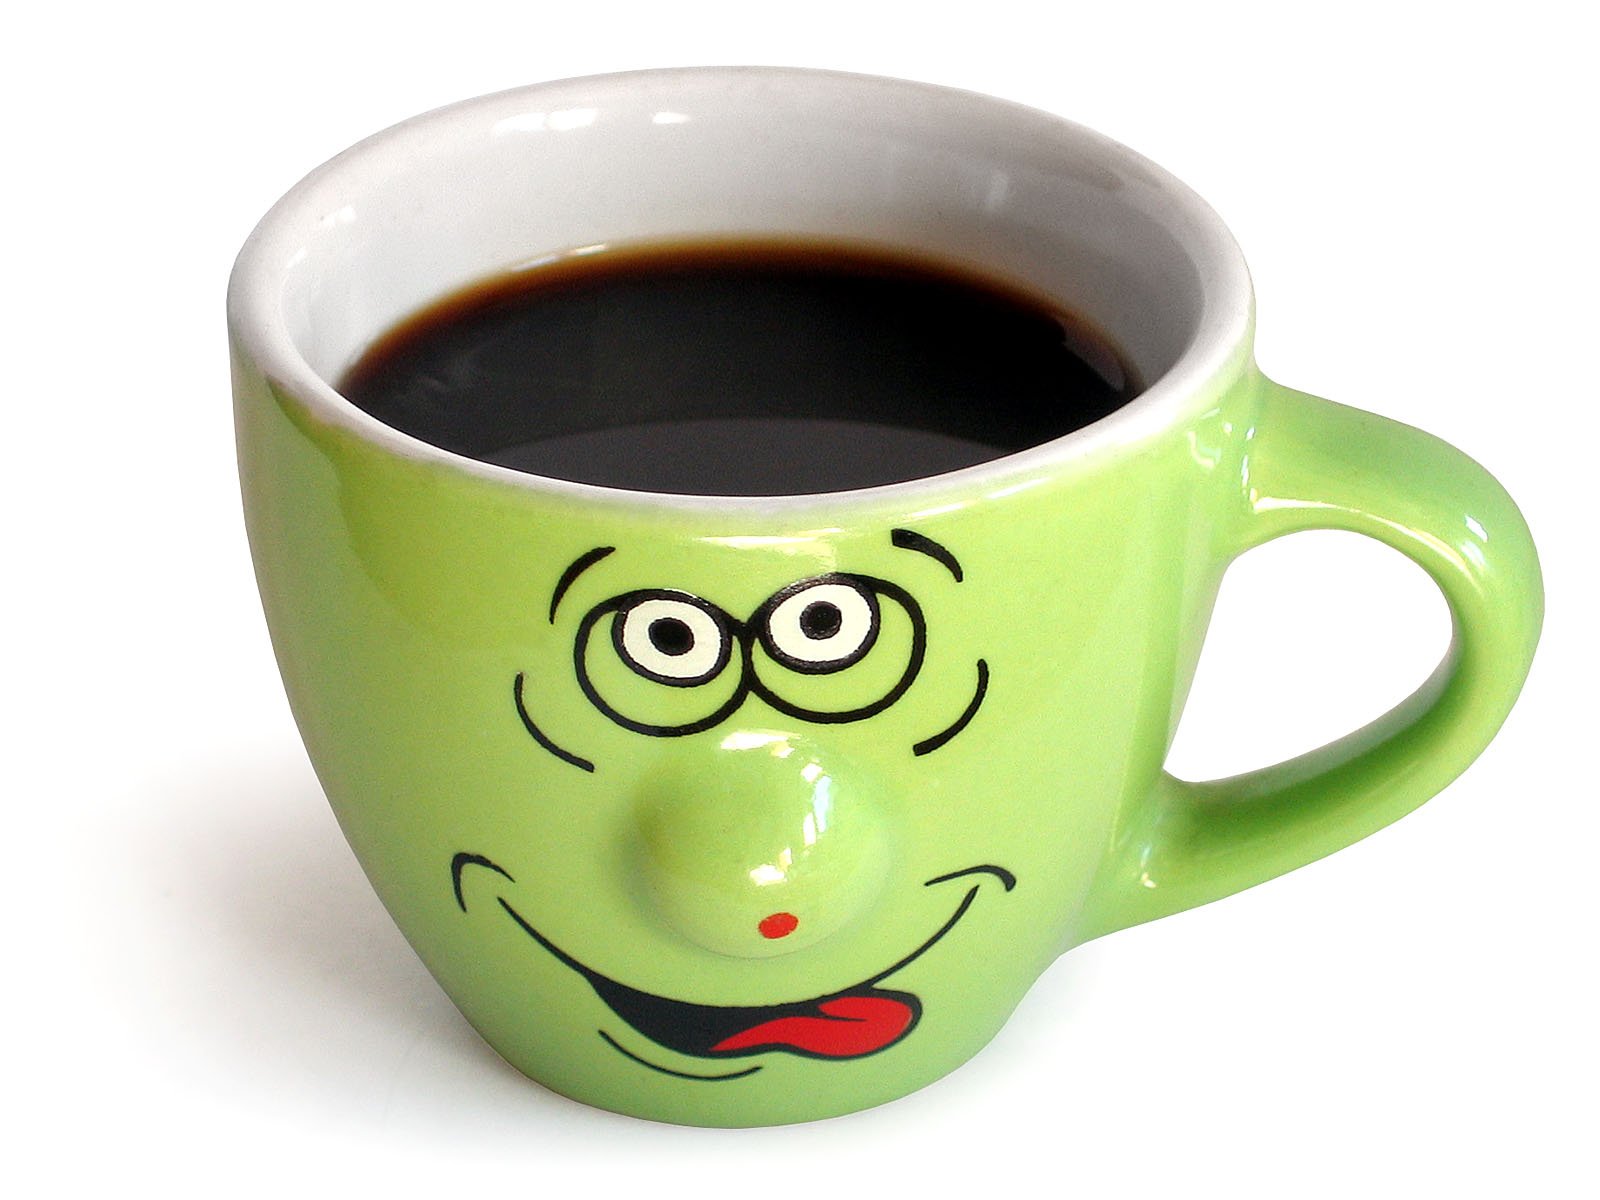 there is a cup of coffee with eyes